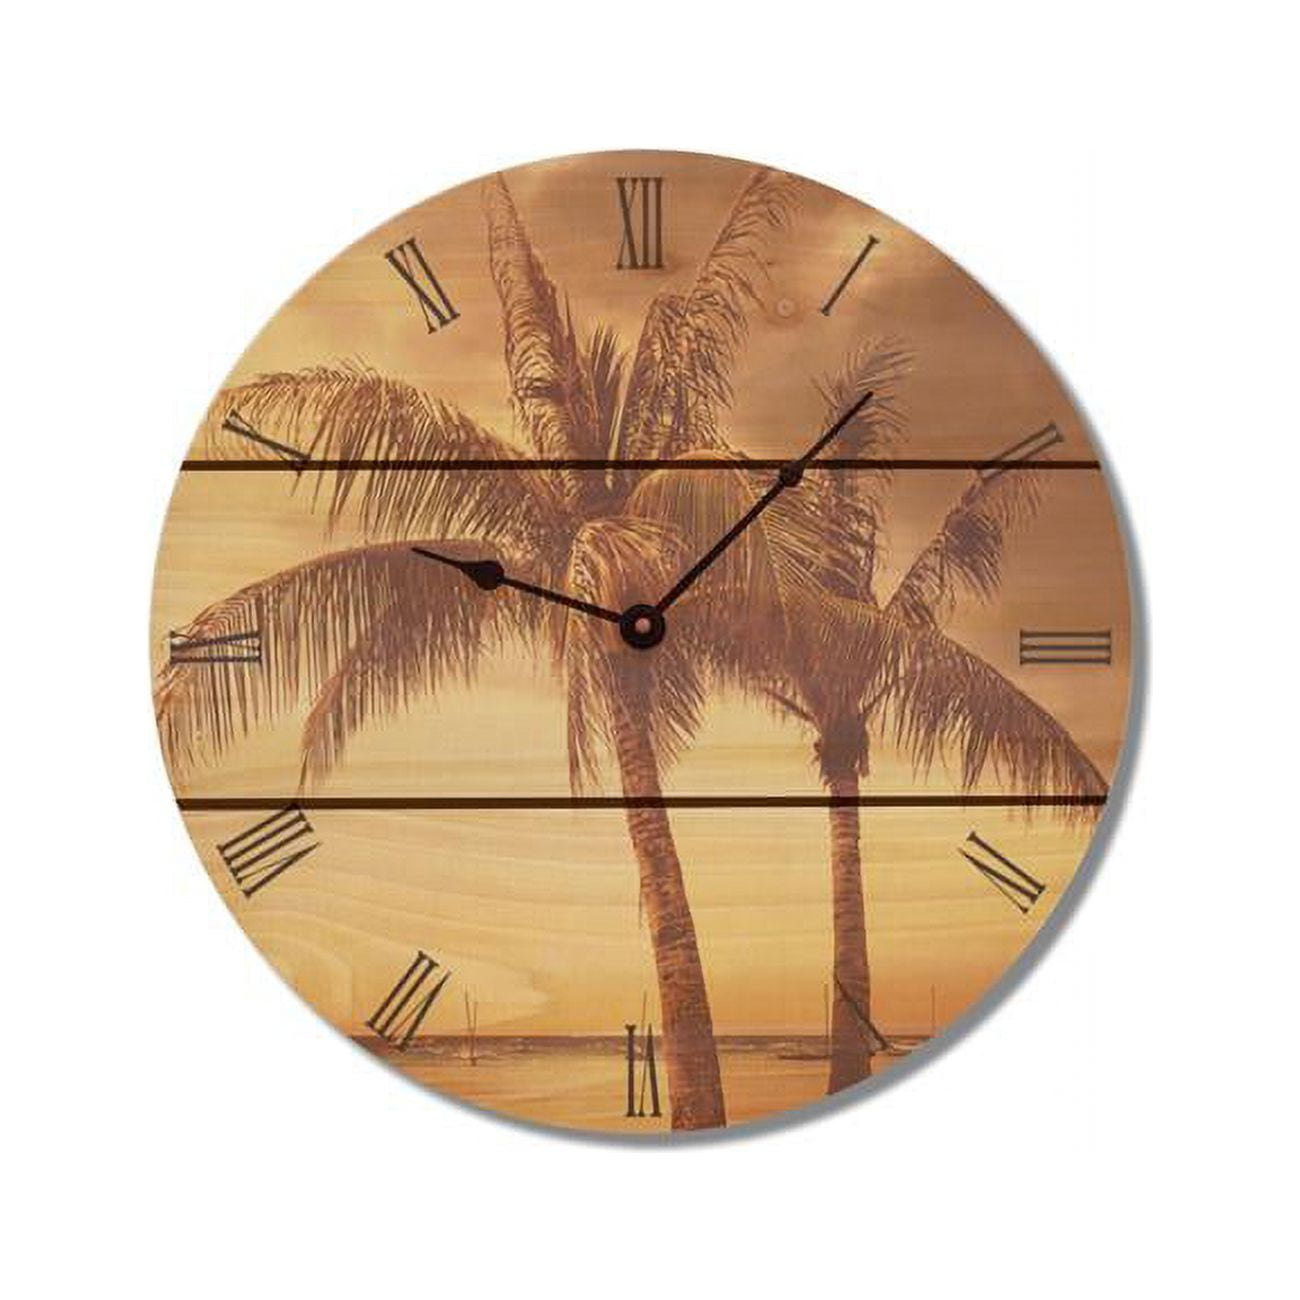 Picture of Day Dream VTC16 16 in. Vintage Tropic wood Wall Clock